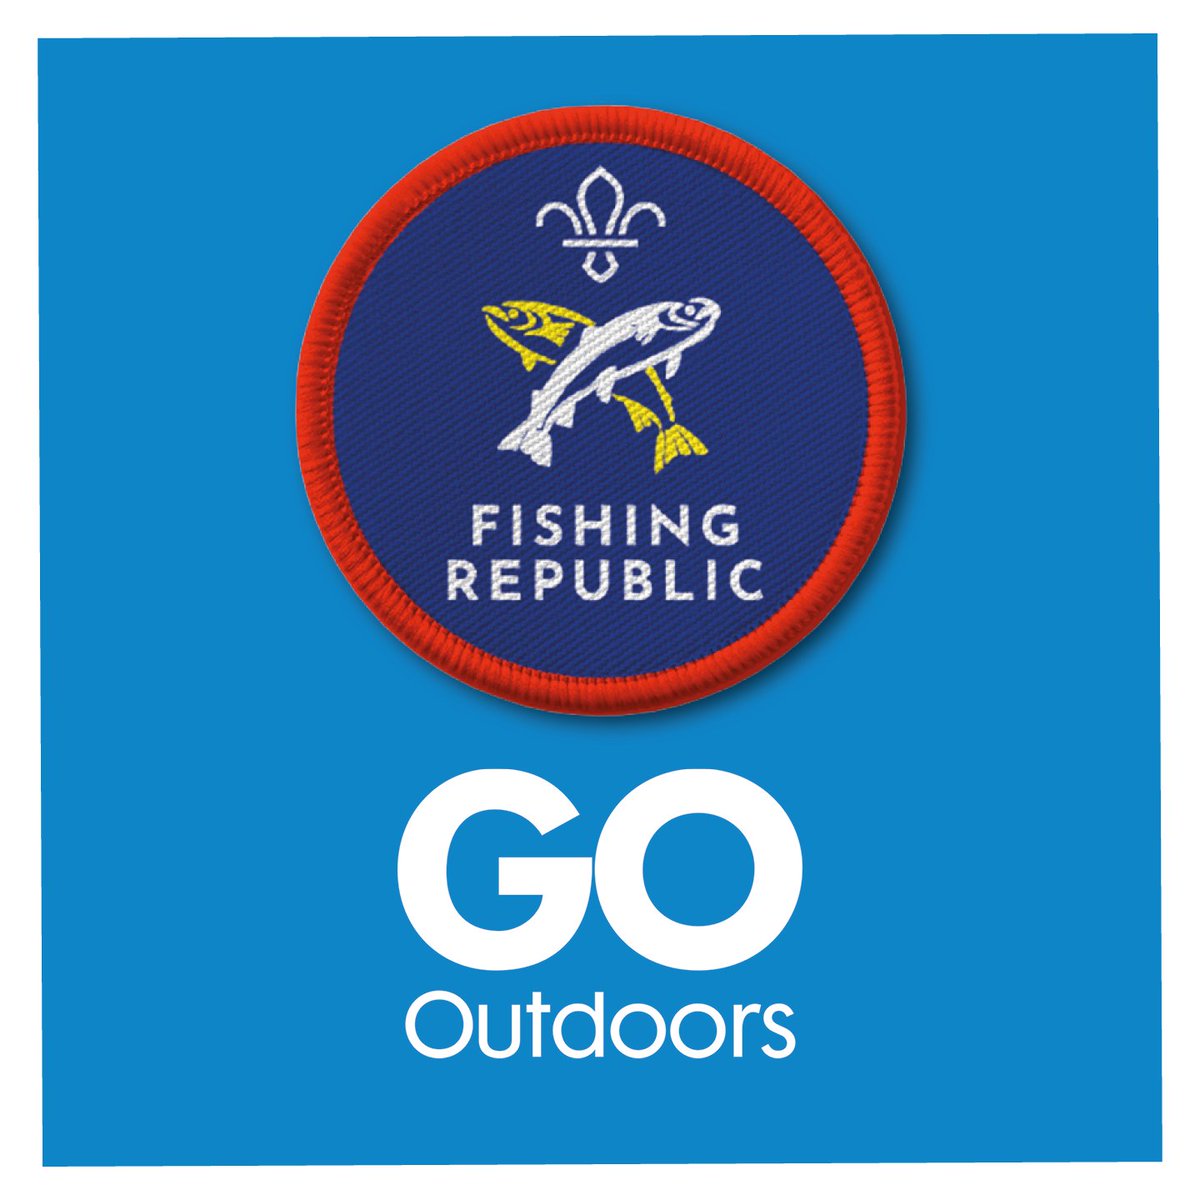 RT scouts 'Grab your fishing rod and earn your Scouts Angler Activity Badge with our newest @GOoutdoors activity: bit.ly/3q5iVit 🎣 @FishingRepublic '